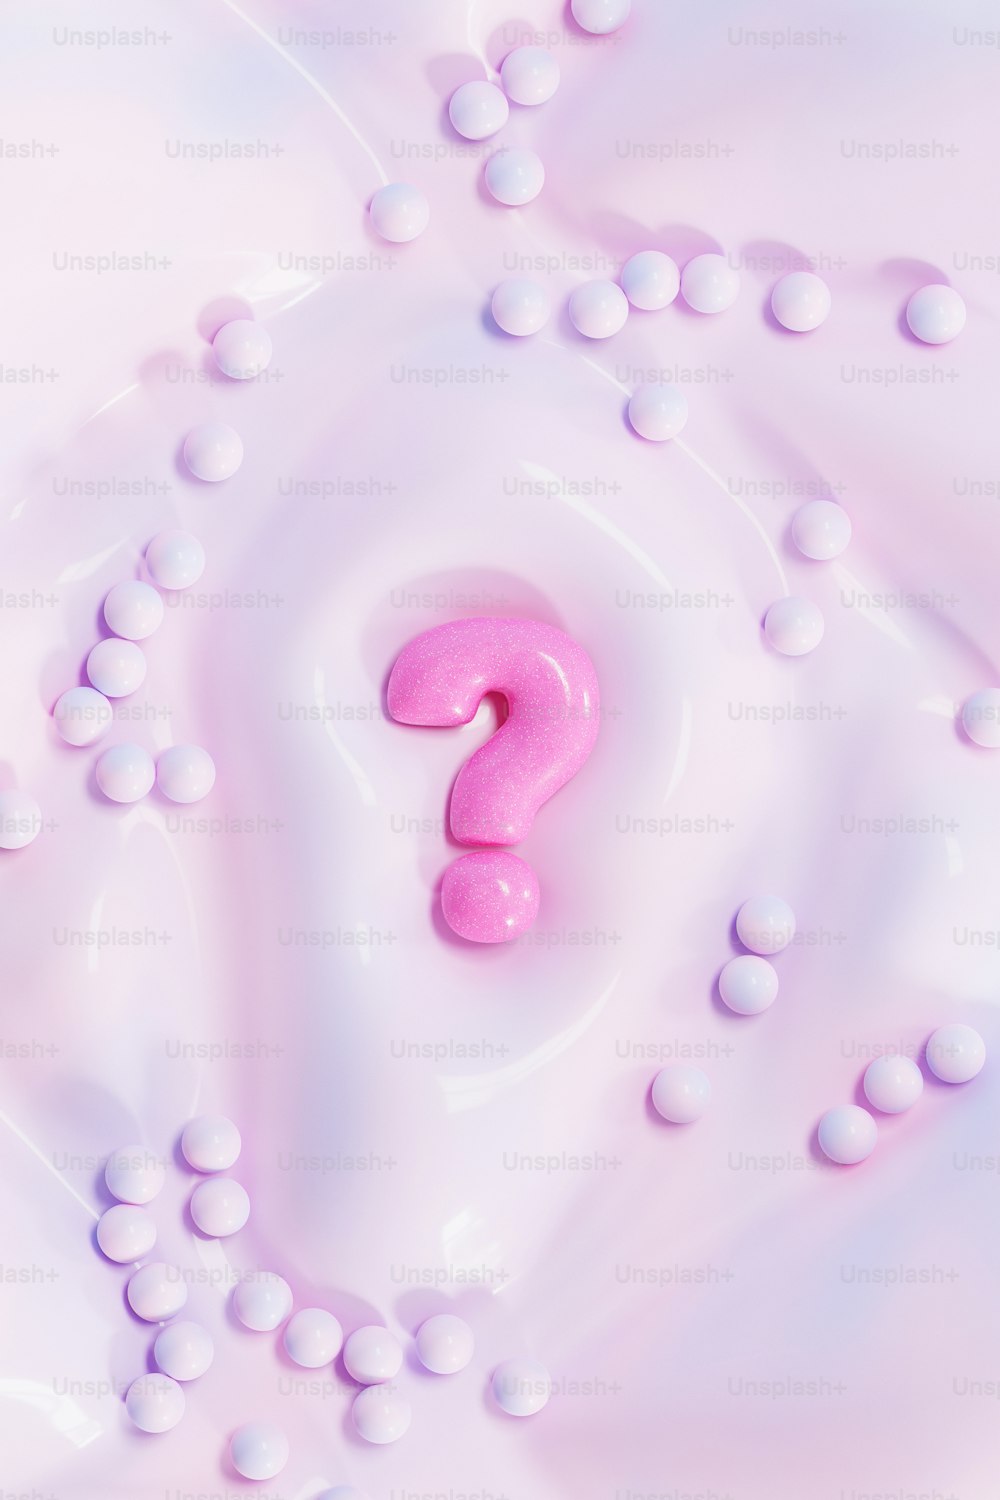 a pink question mark on a white surface